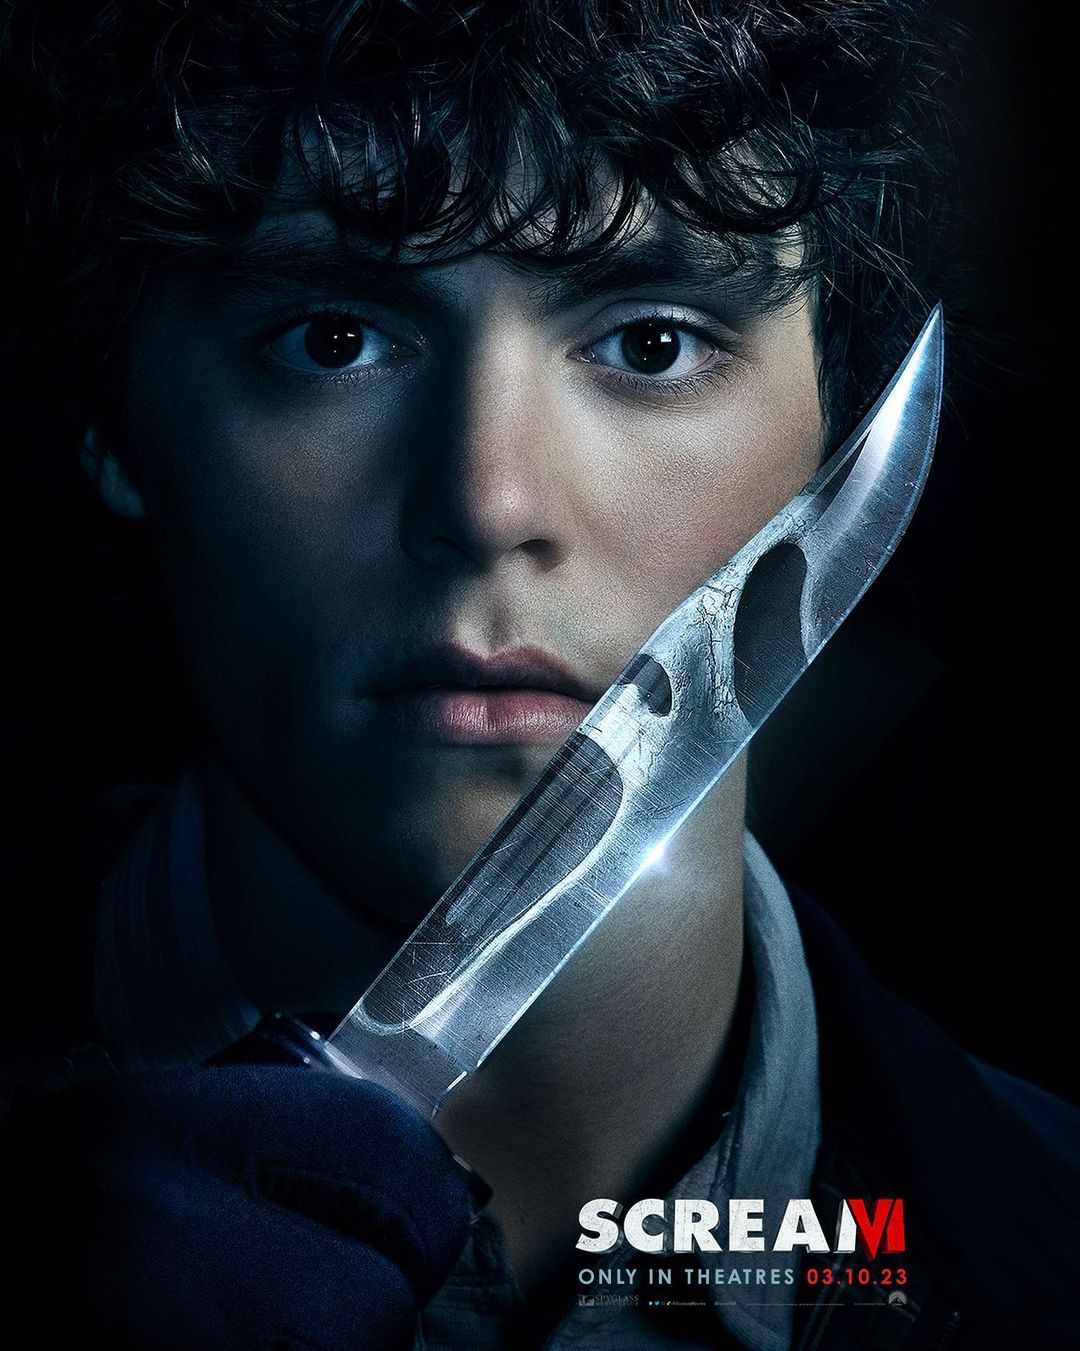 Jack Champion played the role of Ethan Landry in the new horror sequel Scream VI